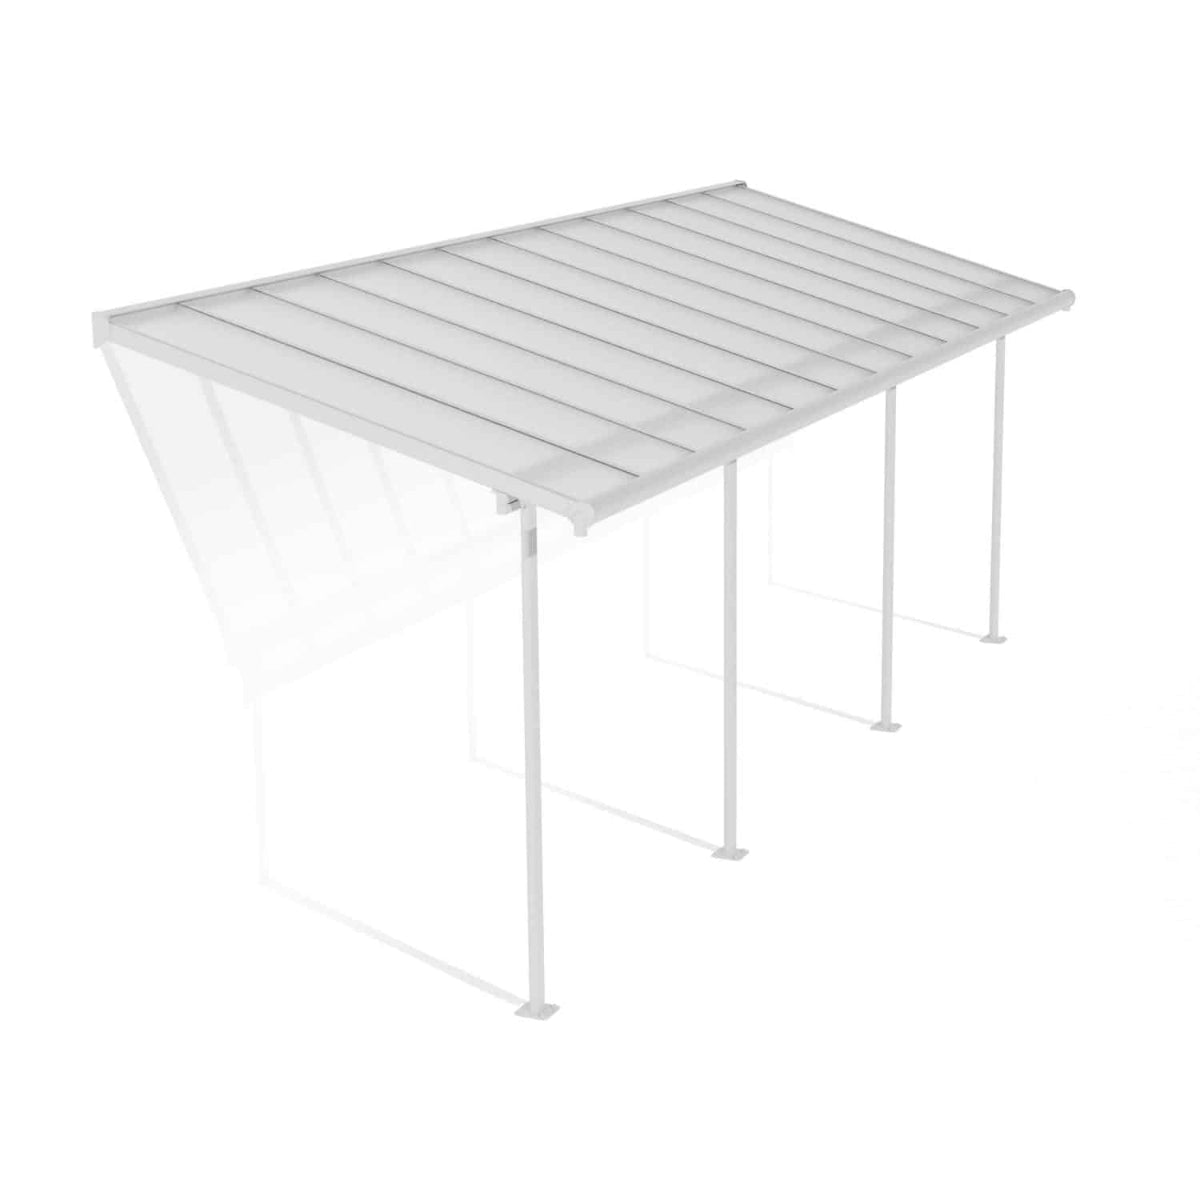 Sierra Patio Covers 7.5 x 22.5 ft. Clear Panels | Palram-Canopia - Delightful Yard